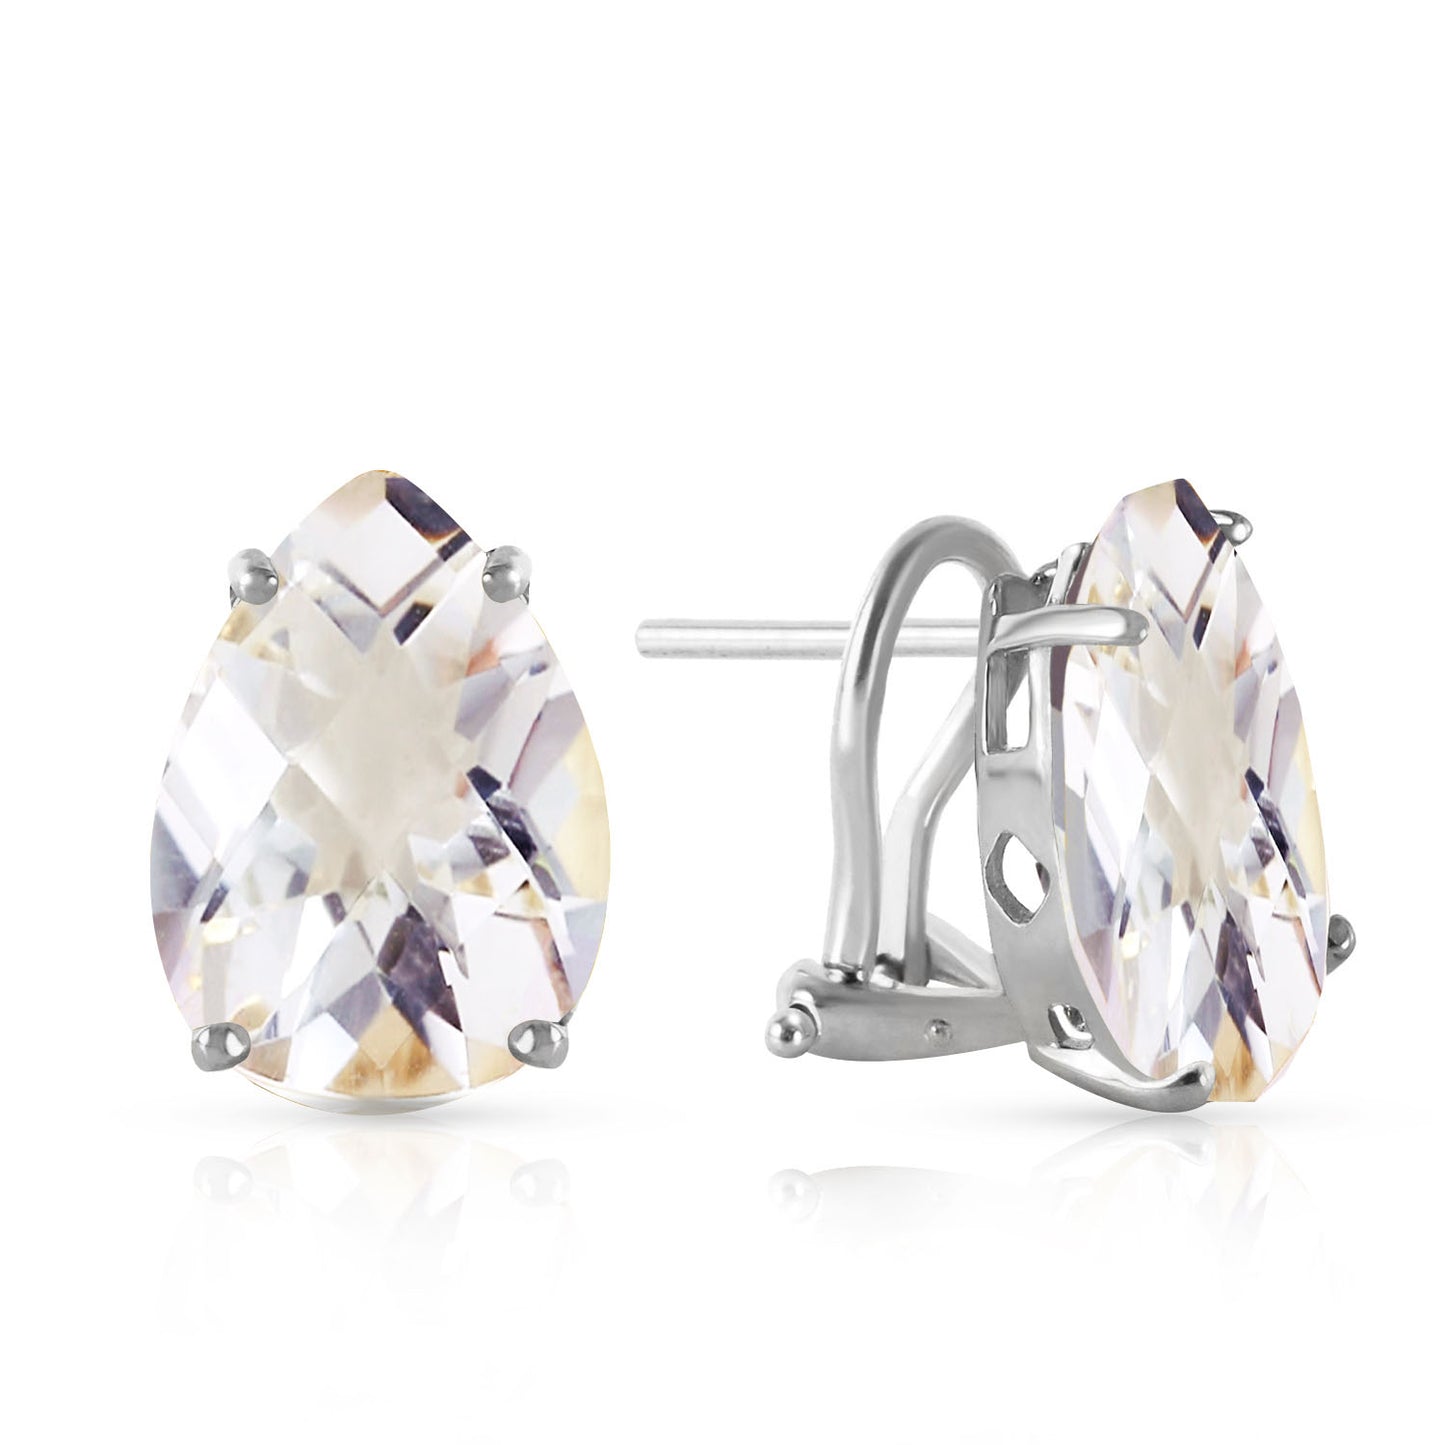 French Clips Earrings Natural White Topaz